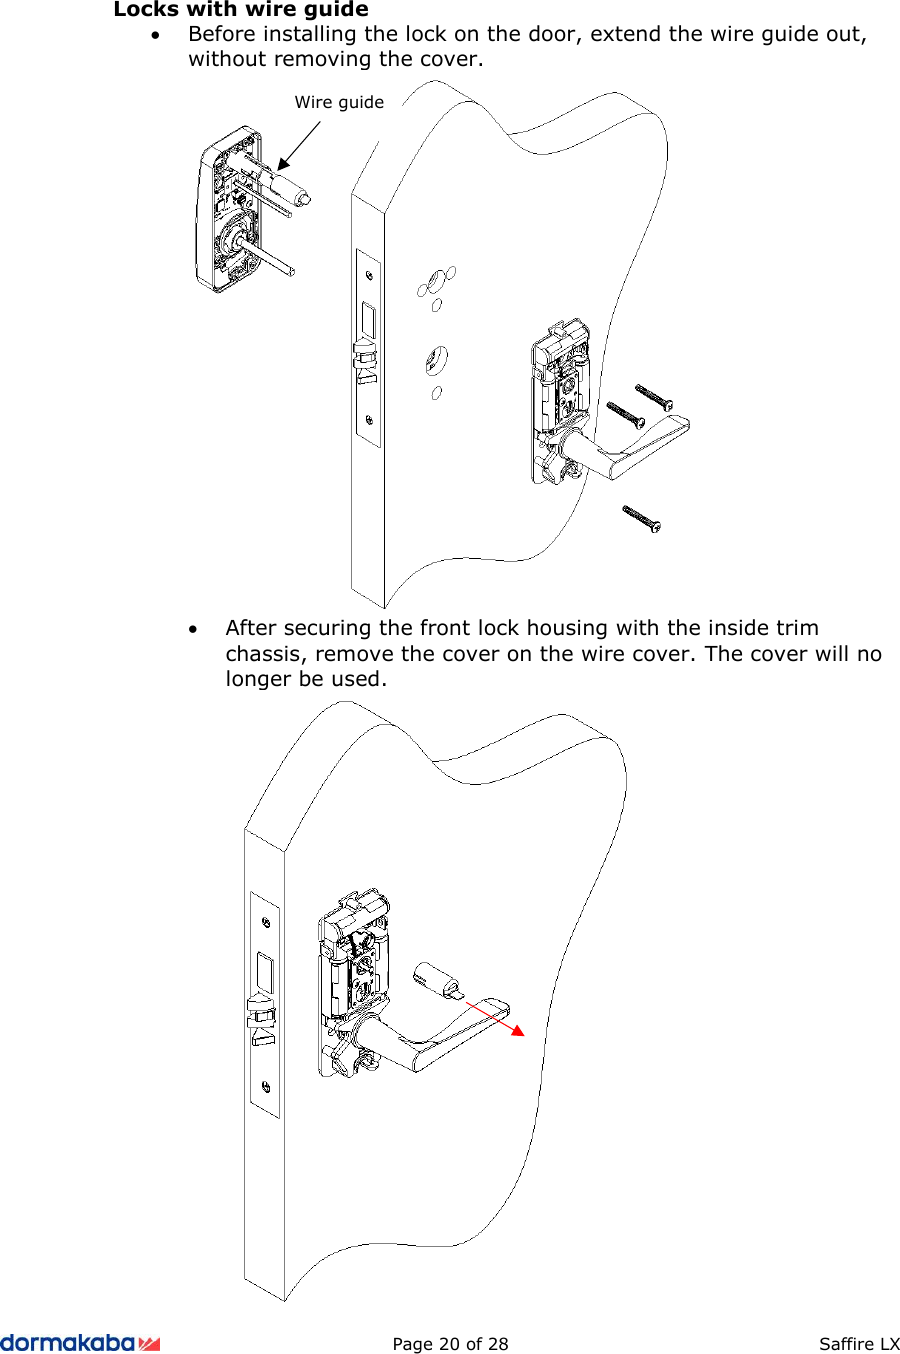          Page 20 of 28  Saffire LX      Locks with wire guide • Before installing the lock on the door, extend the wire guide out, without removing the cover.  • After securing the front lock housing with the inside trim chassis, remove the cover on the wire cover. The cover will no longer be used.  Wire guide 